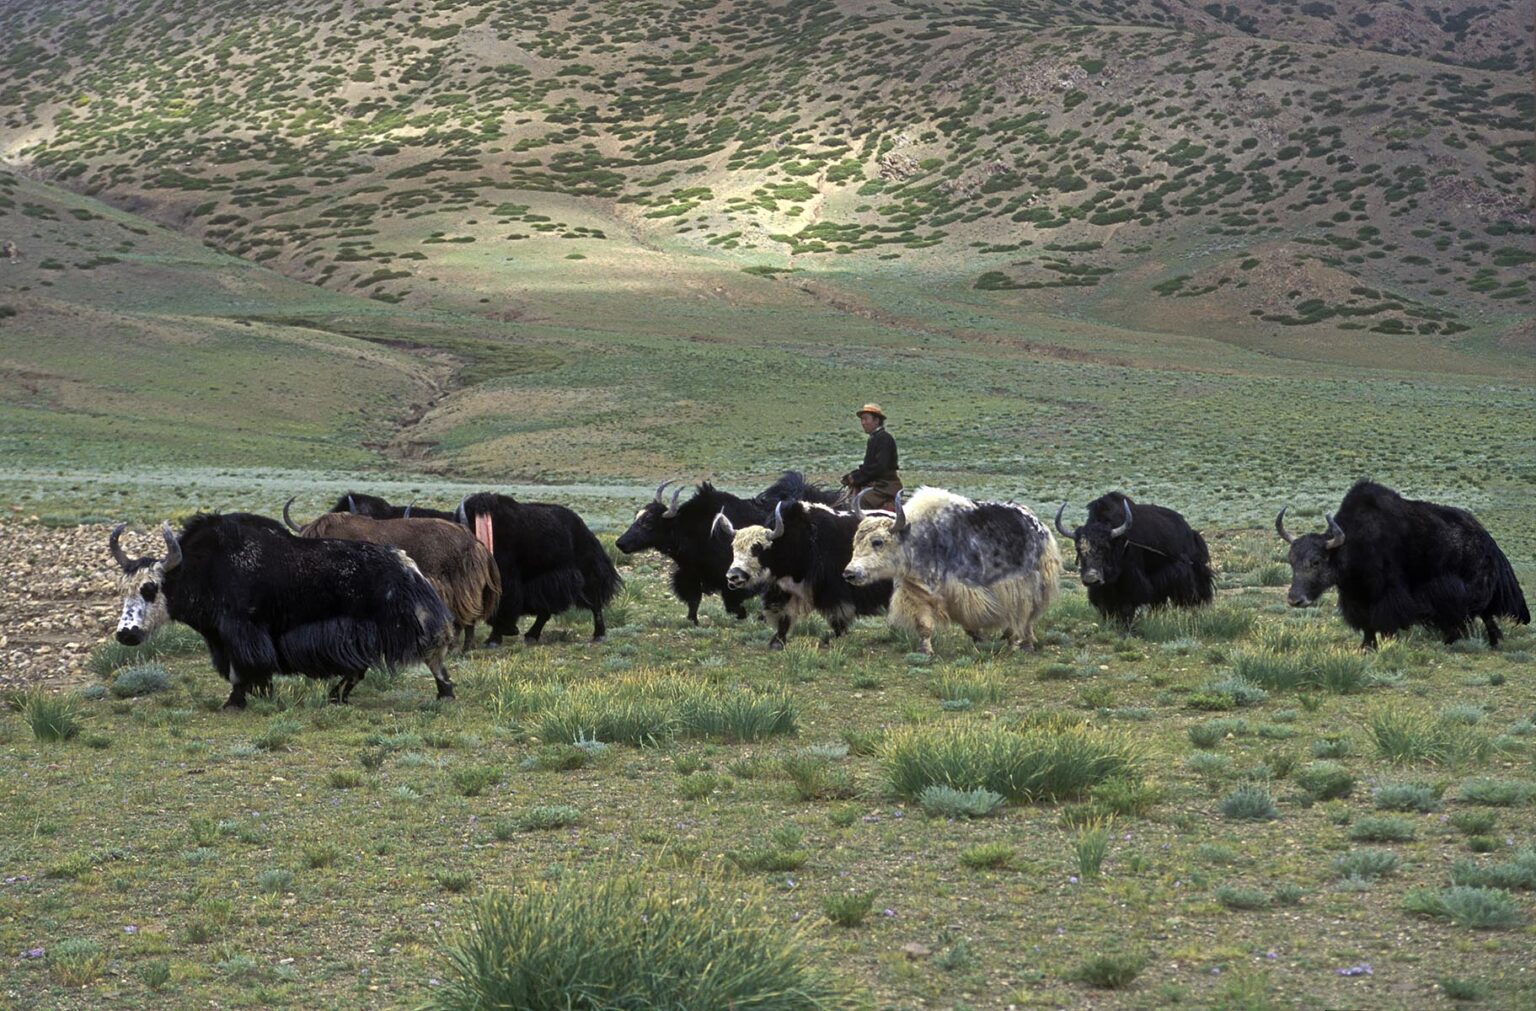 A DROKPA (Tibetan nomad) herds YAKS mounted on his HORSE - Southern route to MOUNT KAILASH, TIBET